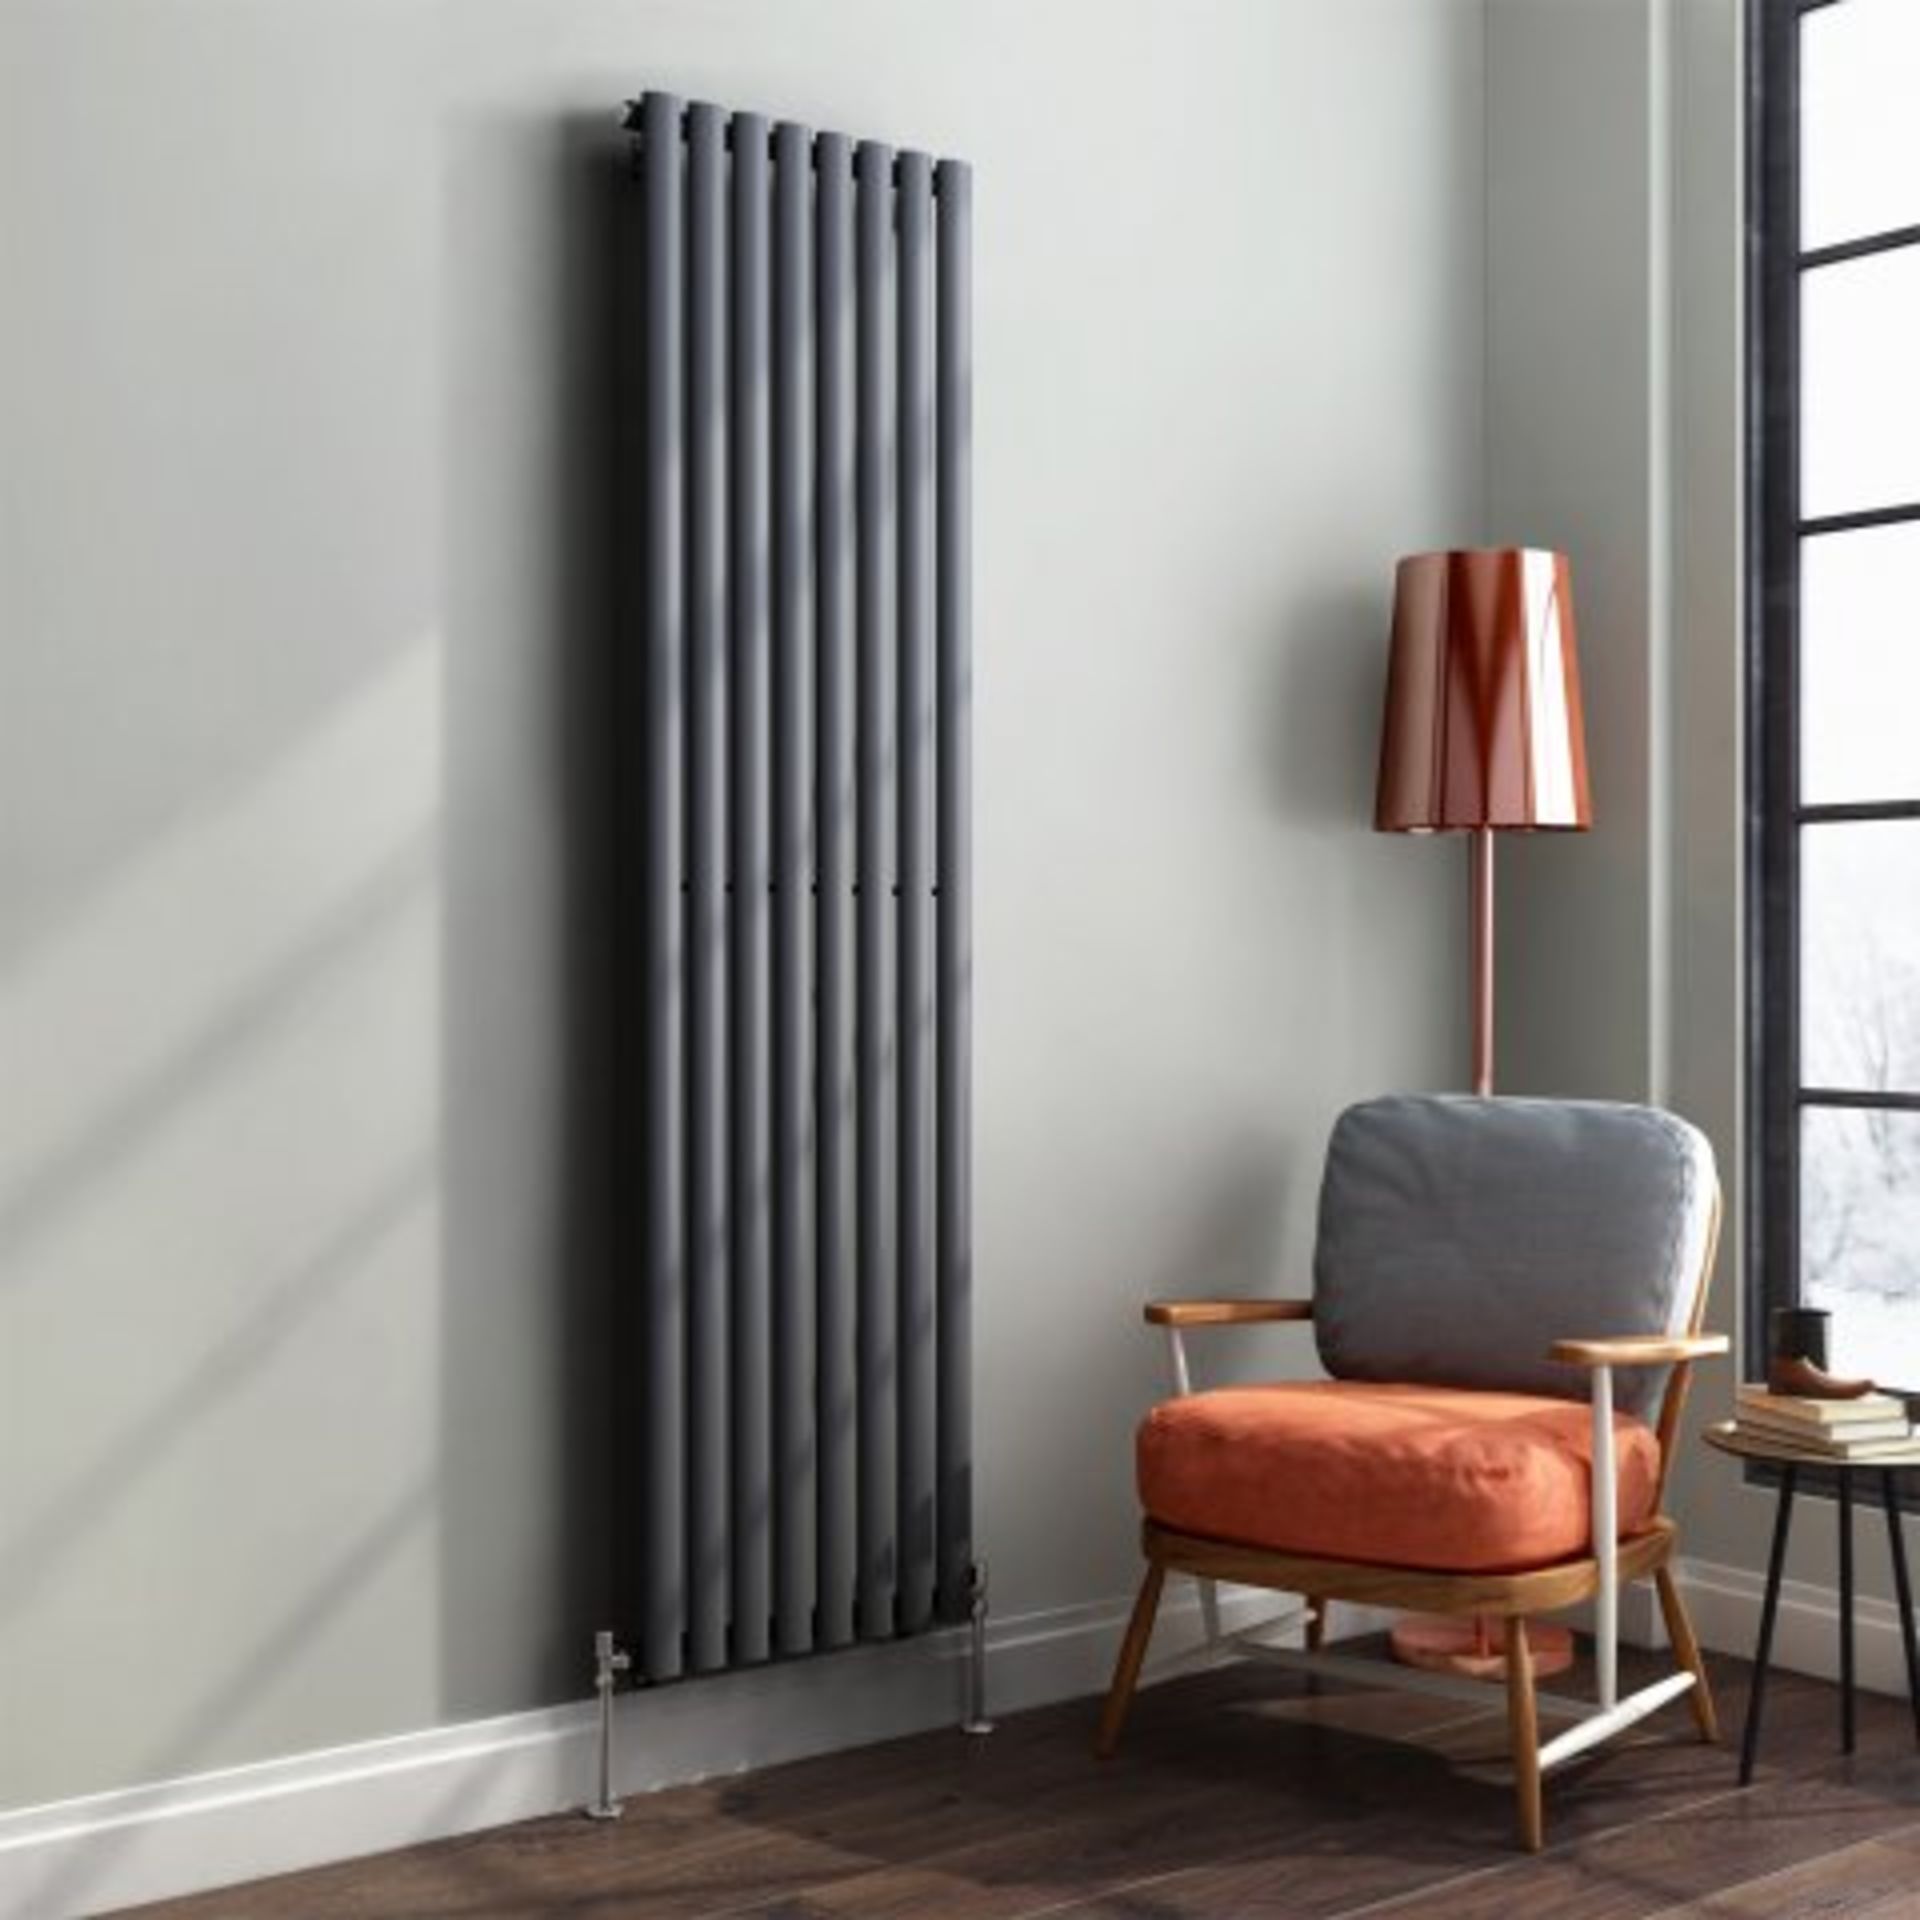 (Z9) 1800x480mm Anthracite Single Oval Tube Vertical Radiator - Ember Premium. RRP £223.99. For an - Image 2 of 5